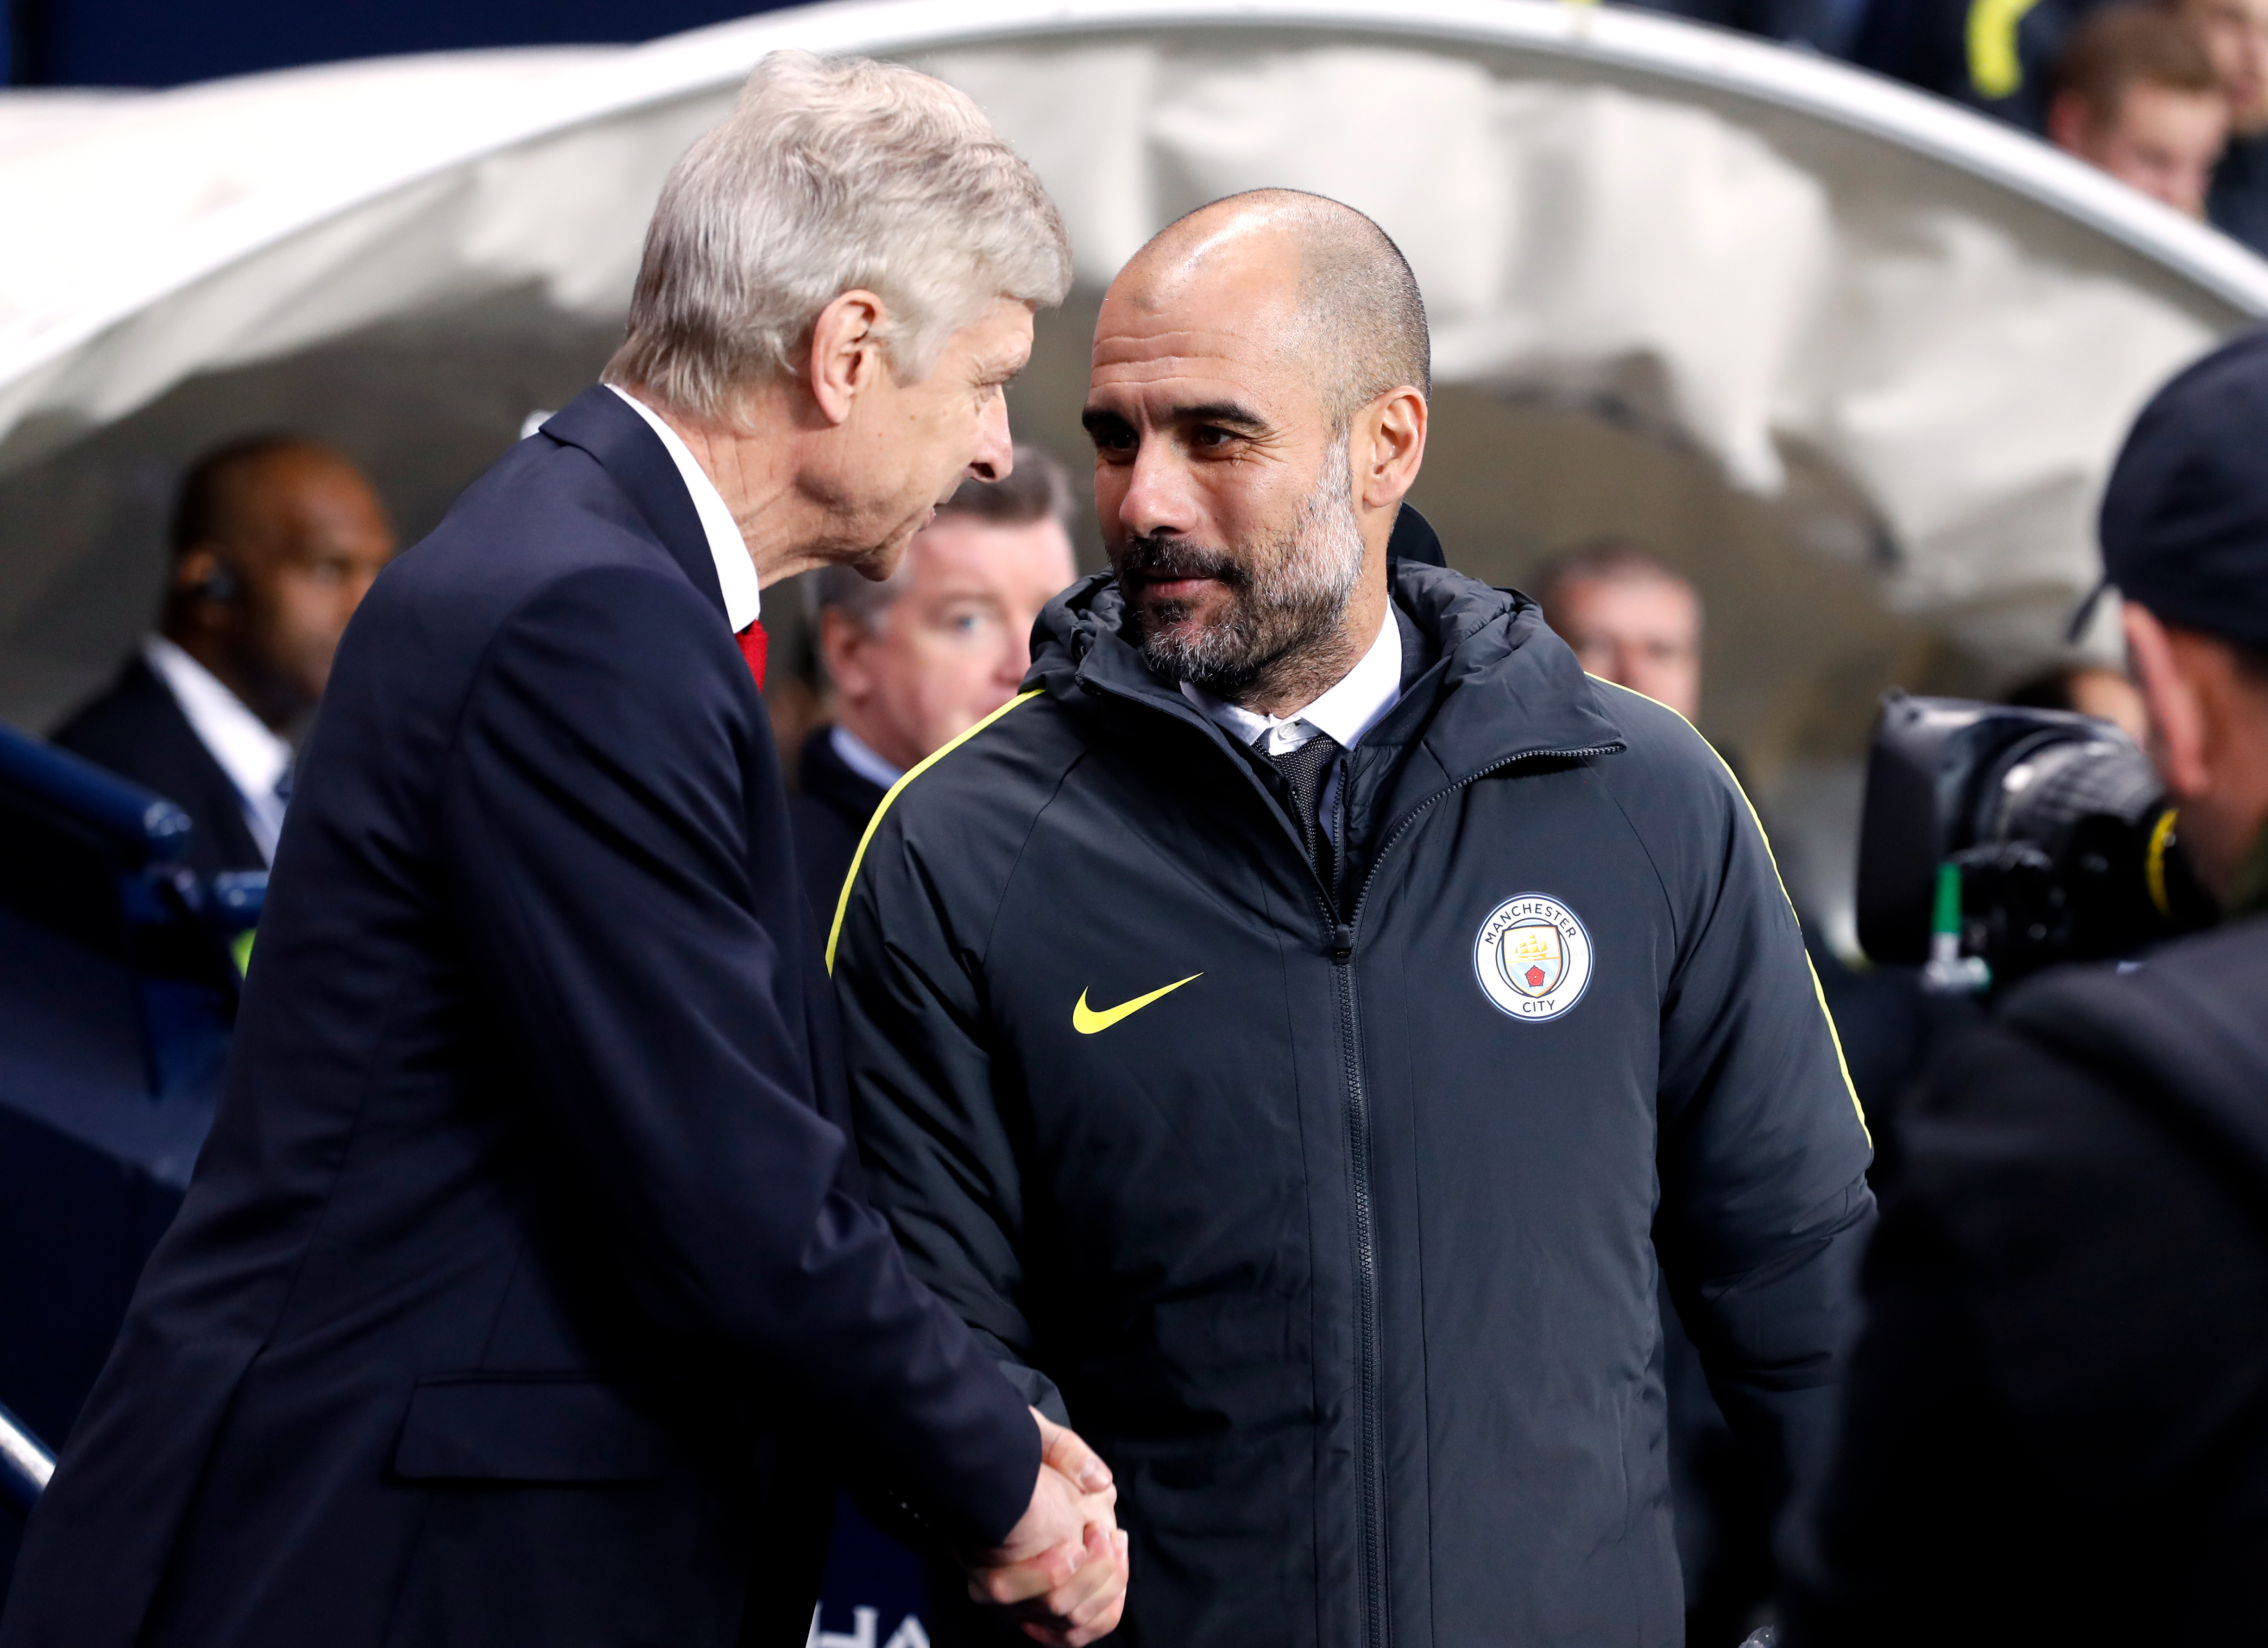 Arsenal manager Arsene Wenger and Manchester City manager Pep Guardiola